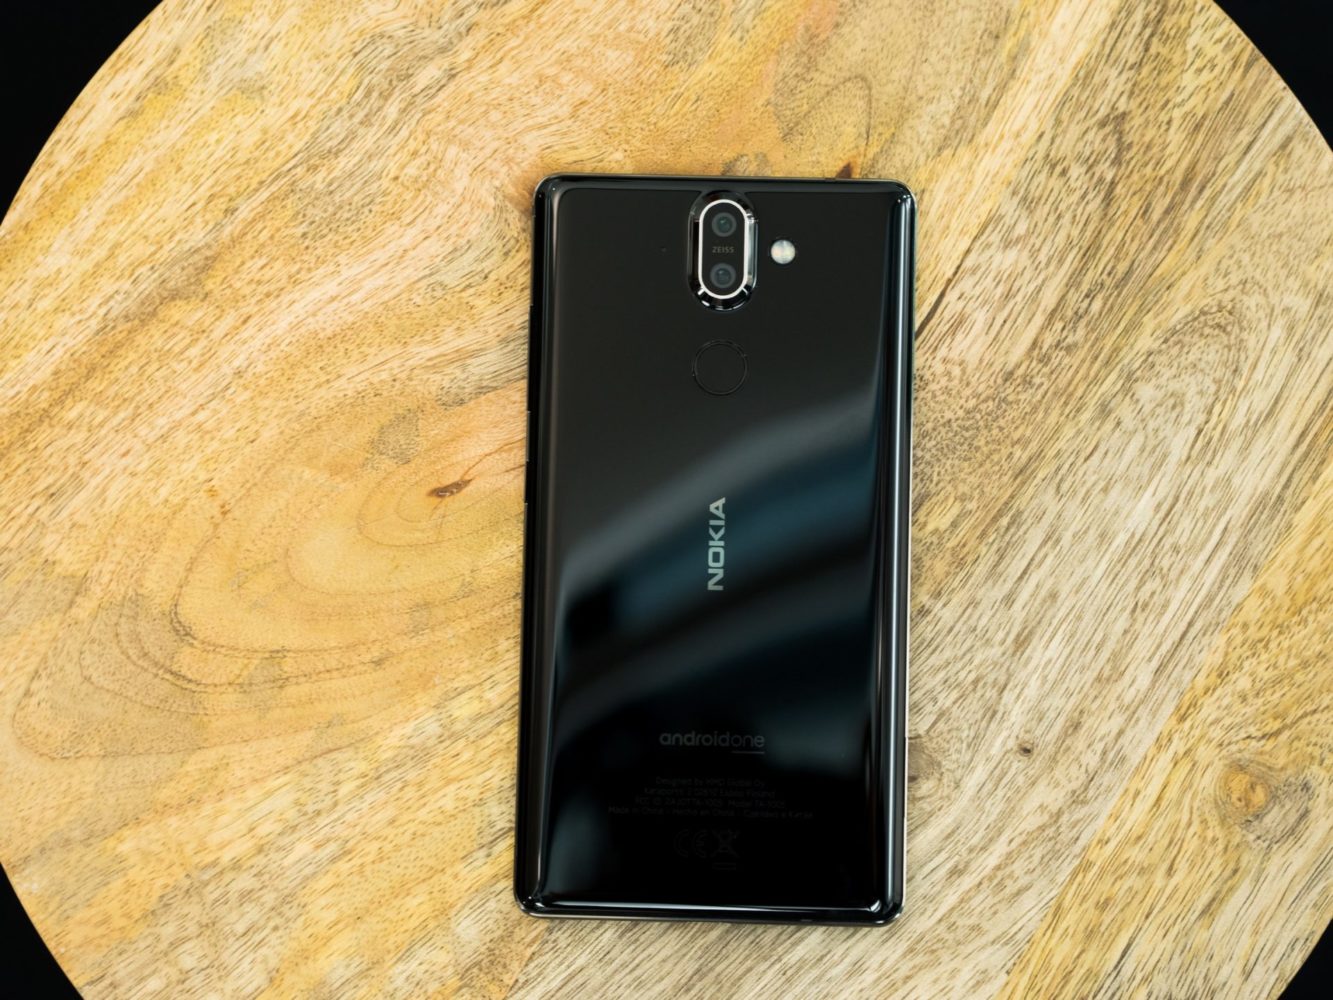 Nokia 8 Sirocco released hands-on rear